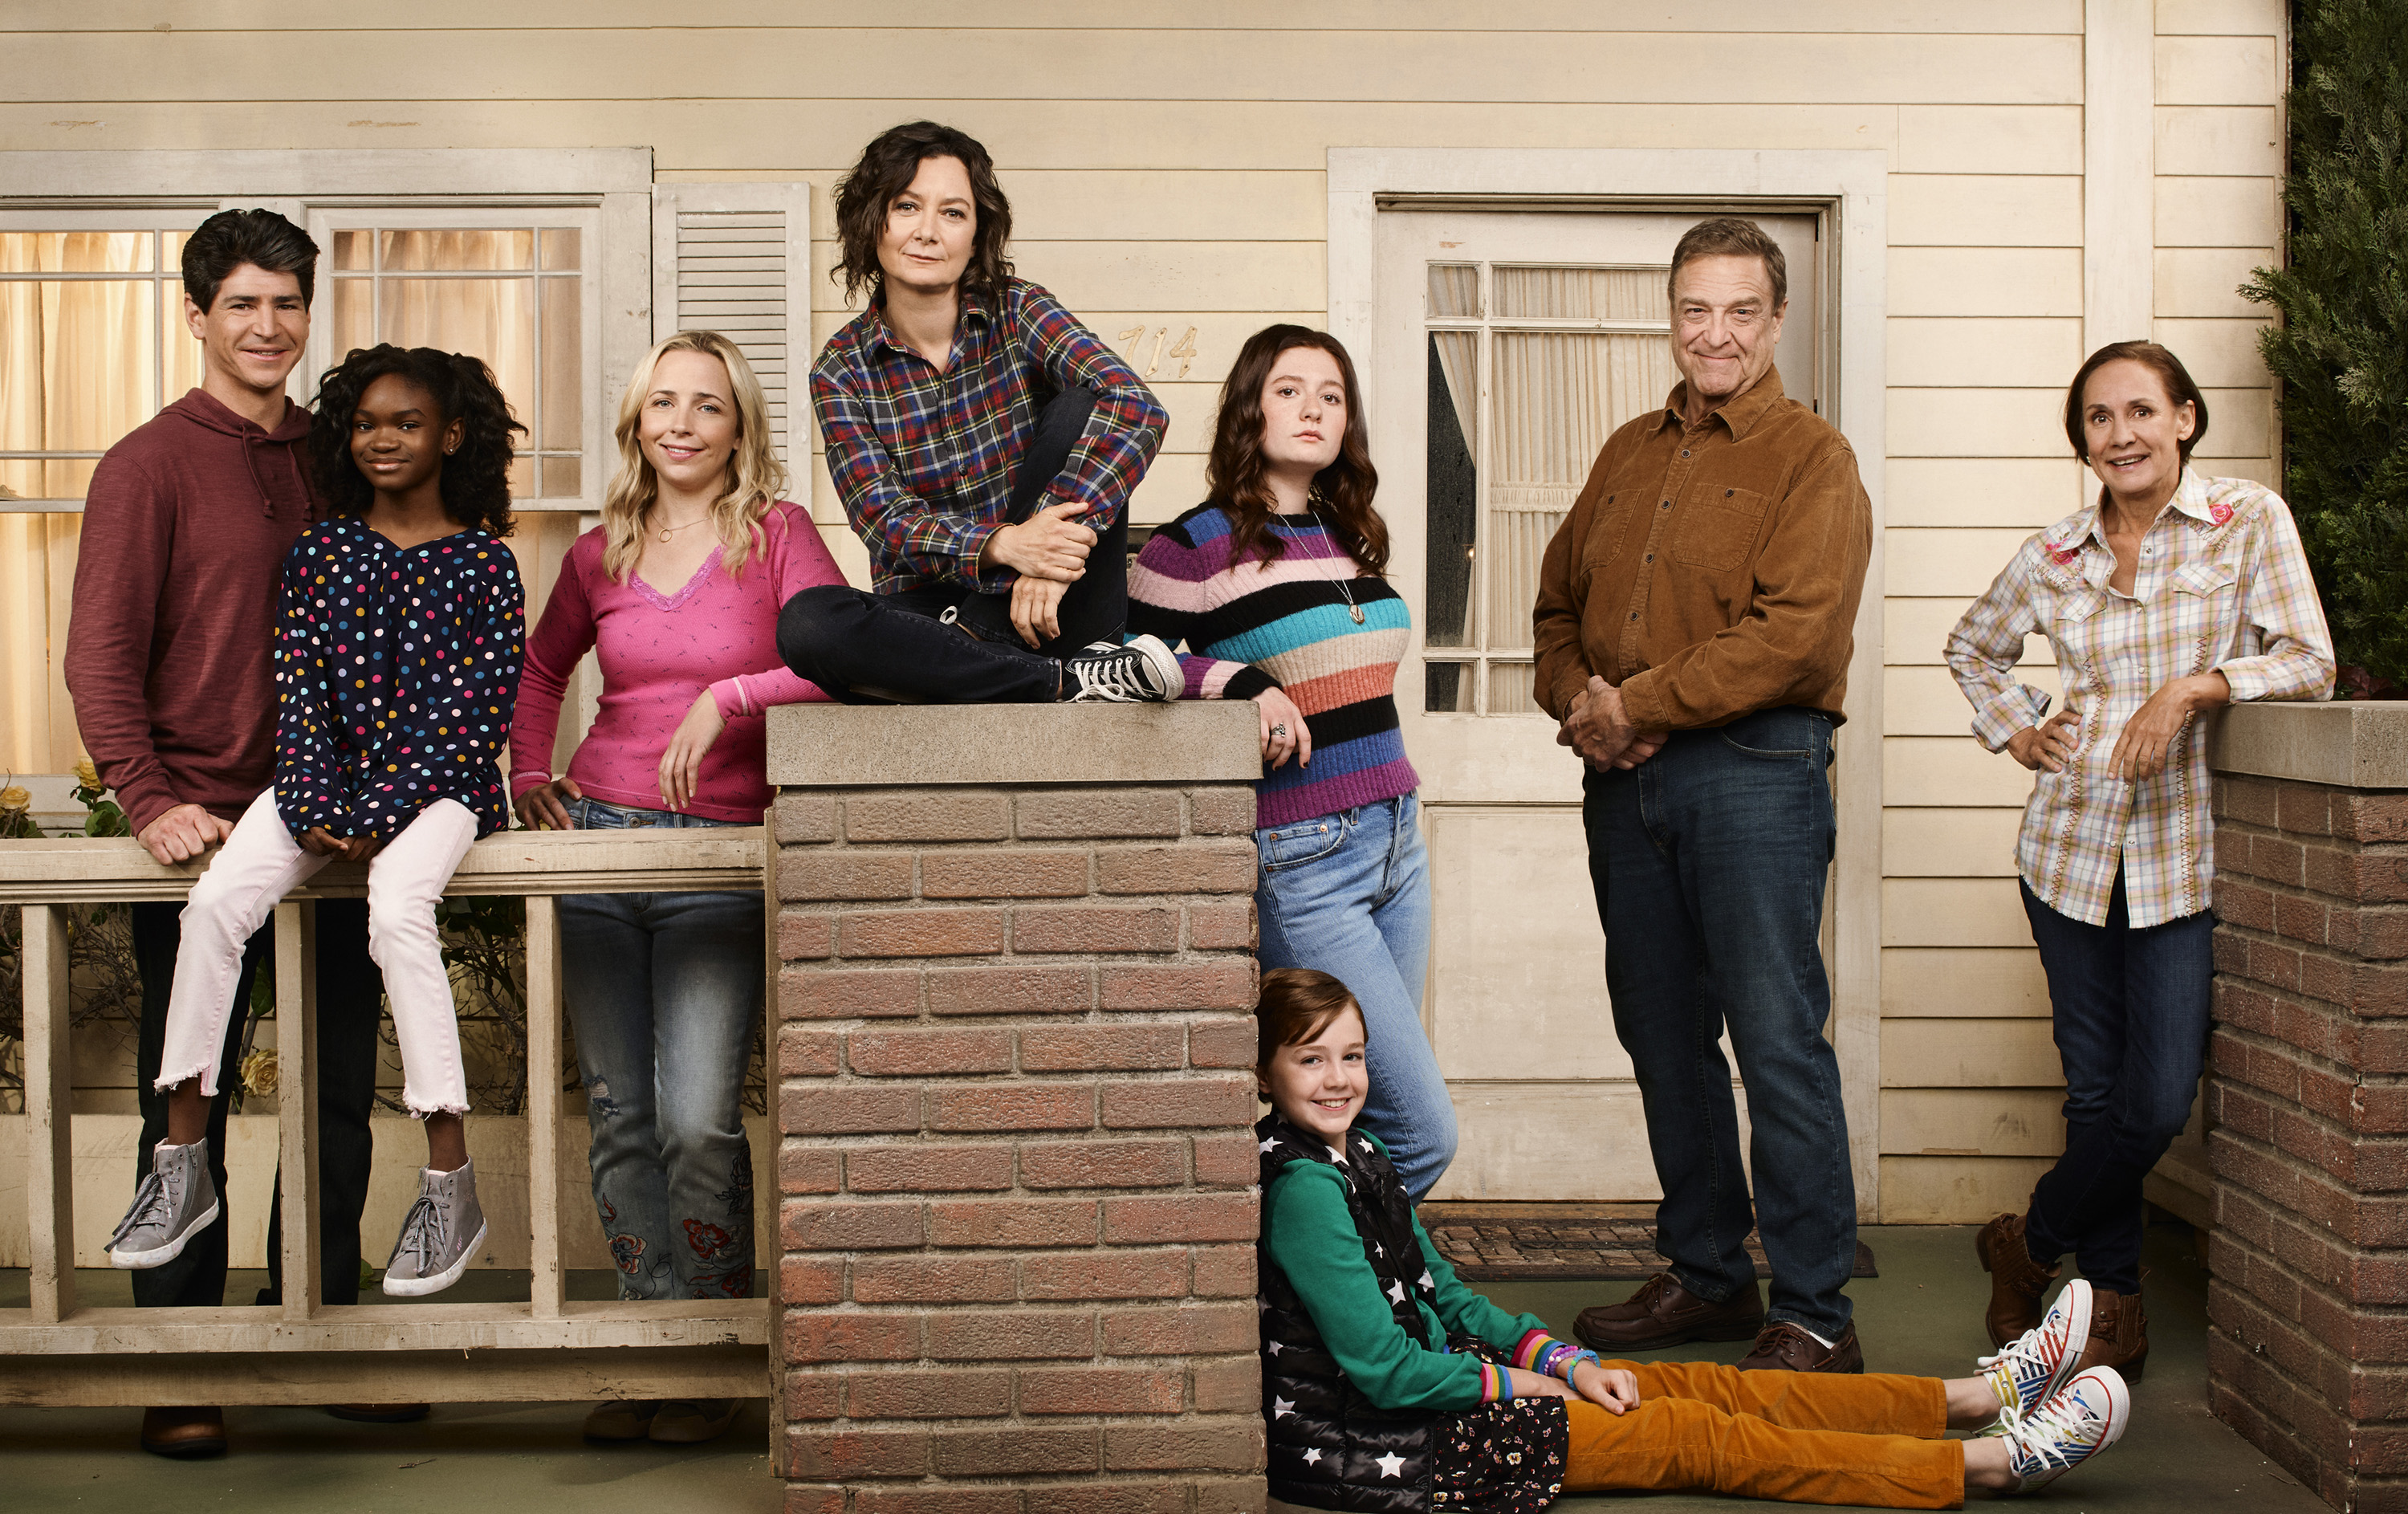 Michael Fishman as D.J. Conner, Jayden Rey as Mary Conner, Lecy Goranson as Becky Conner-Healy, Sara Gilbert as Darlene Conner, Emma Kenney as Harris Conner-Healy, Ames McNamara as Mark Conner-Healy, John Goodman as Dan Conner, and Laurie Metcalf as Jackie Harris.